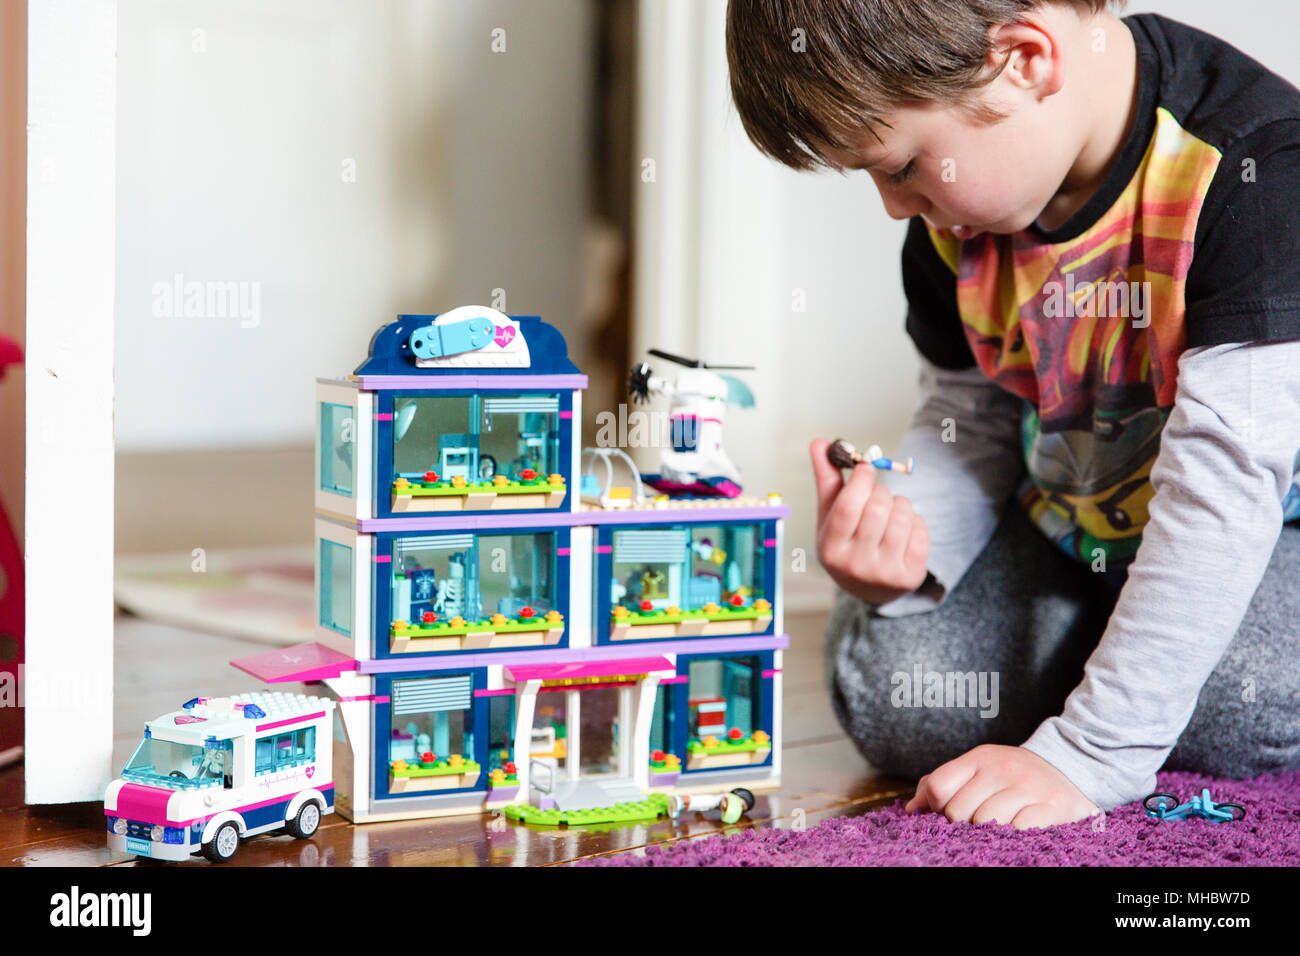 6 years old boy playing with lego hospital set Stock Photo